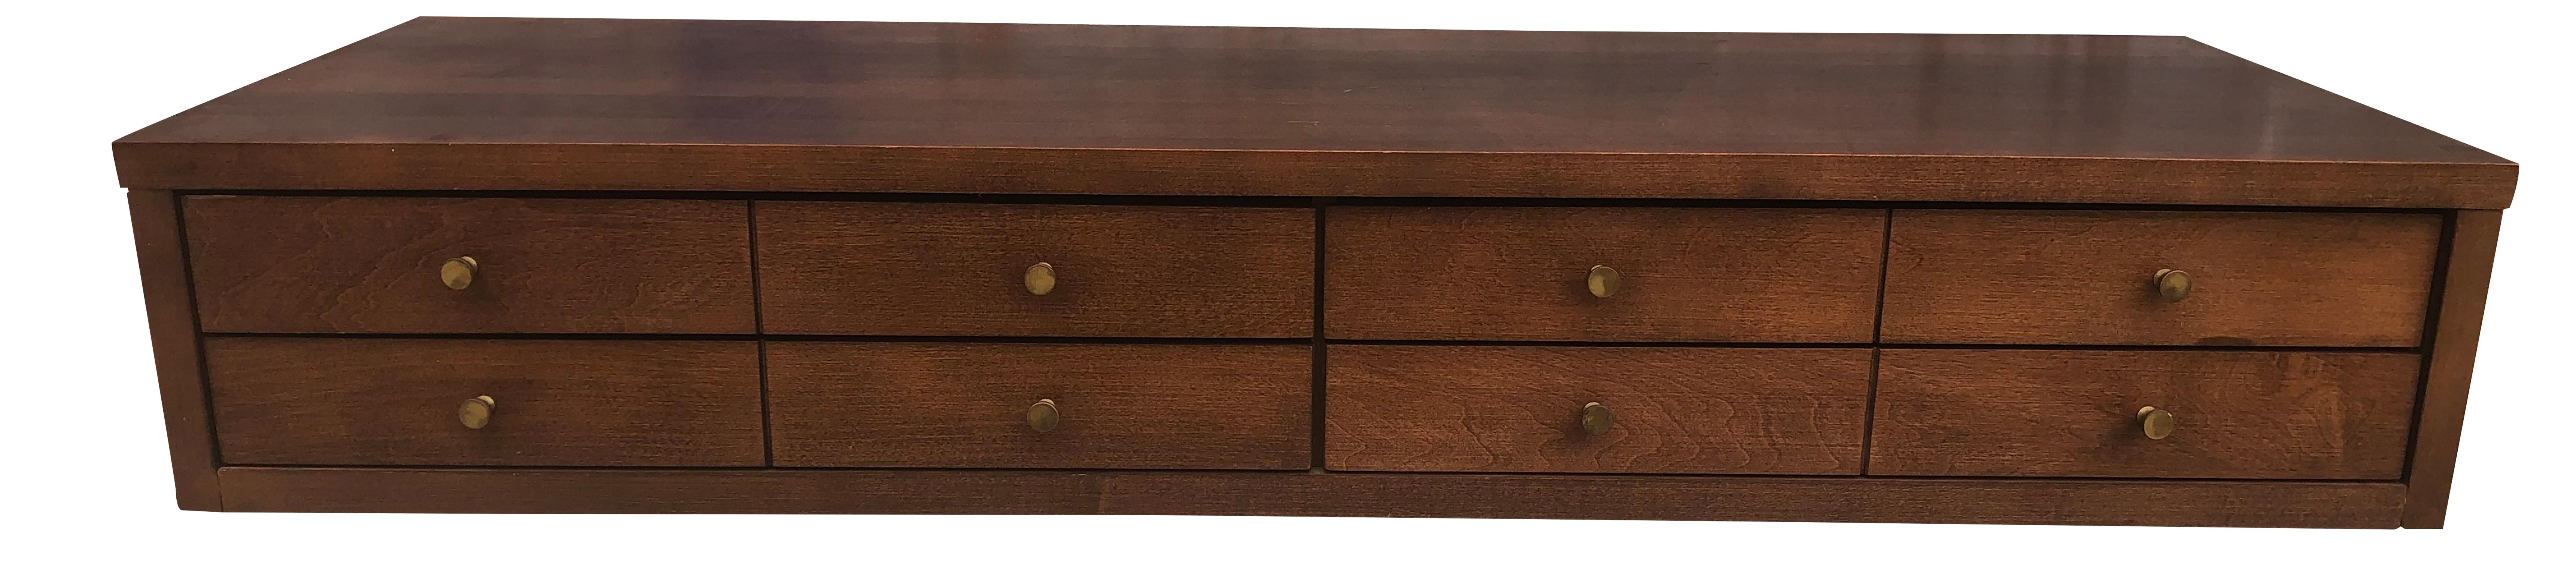 Nice Paul Mccobb 3' small chest of drawers in solid maple construction with dark walnut finish. Very high quality construction with original brass pulls. Made for top of dresser or bookcase. 8 brass knobs 4 drawers. Planner Group, Winchendon Mass.